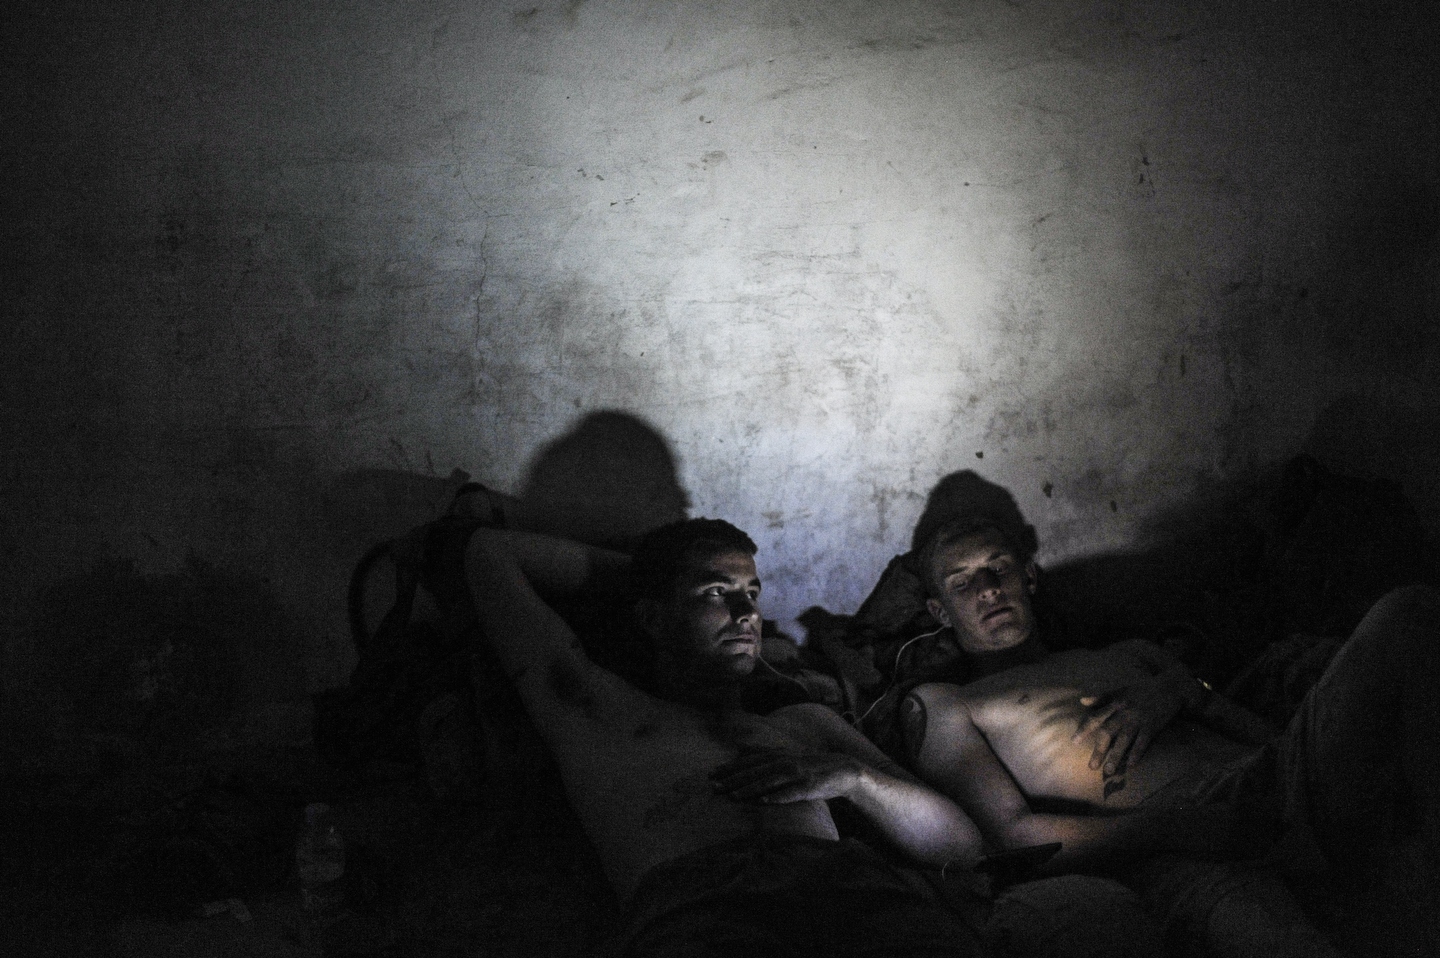 Afghanistan, 2009. Two Marines talk quietly at COP Sharp before going to bed in Helmand, Afghanistan. The Marine on the left, Corporal Matt Kaiser, had nearly been killed by a buried bomb earlier that day. He was sweeping the road with a minesweeper when the dirt exploded right in front of him.  He staggered back saying,  God, I'm still here,  and clutching his ears. He laughed and for the rest of the day, couldn't hear much and talked way too loud.  It was the second time in just a few weeks he'd nearly been killed by a bomb.